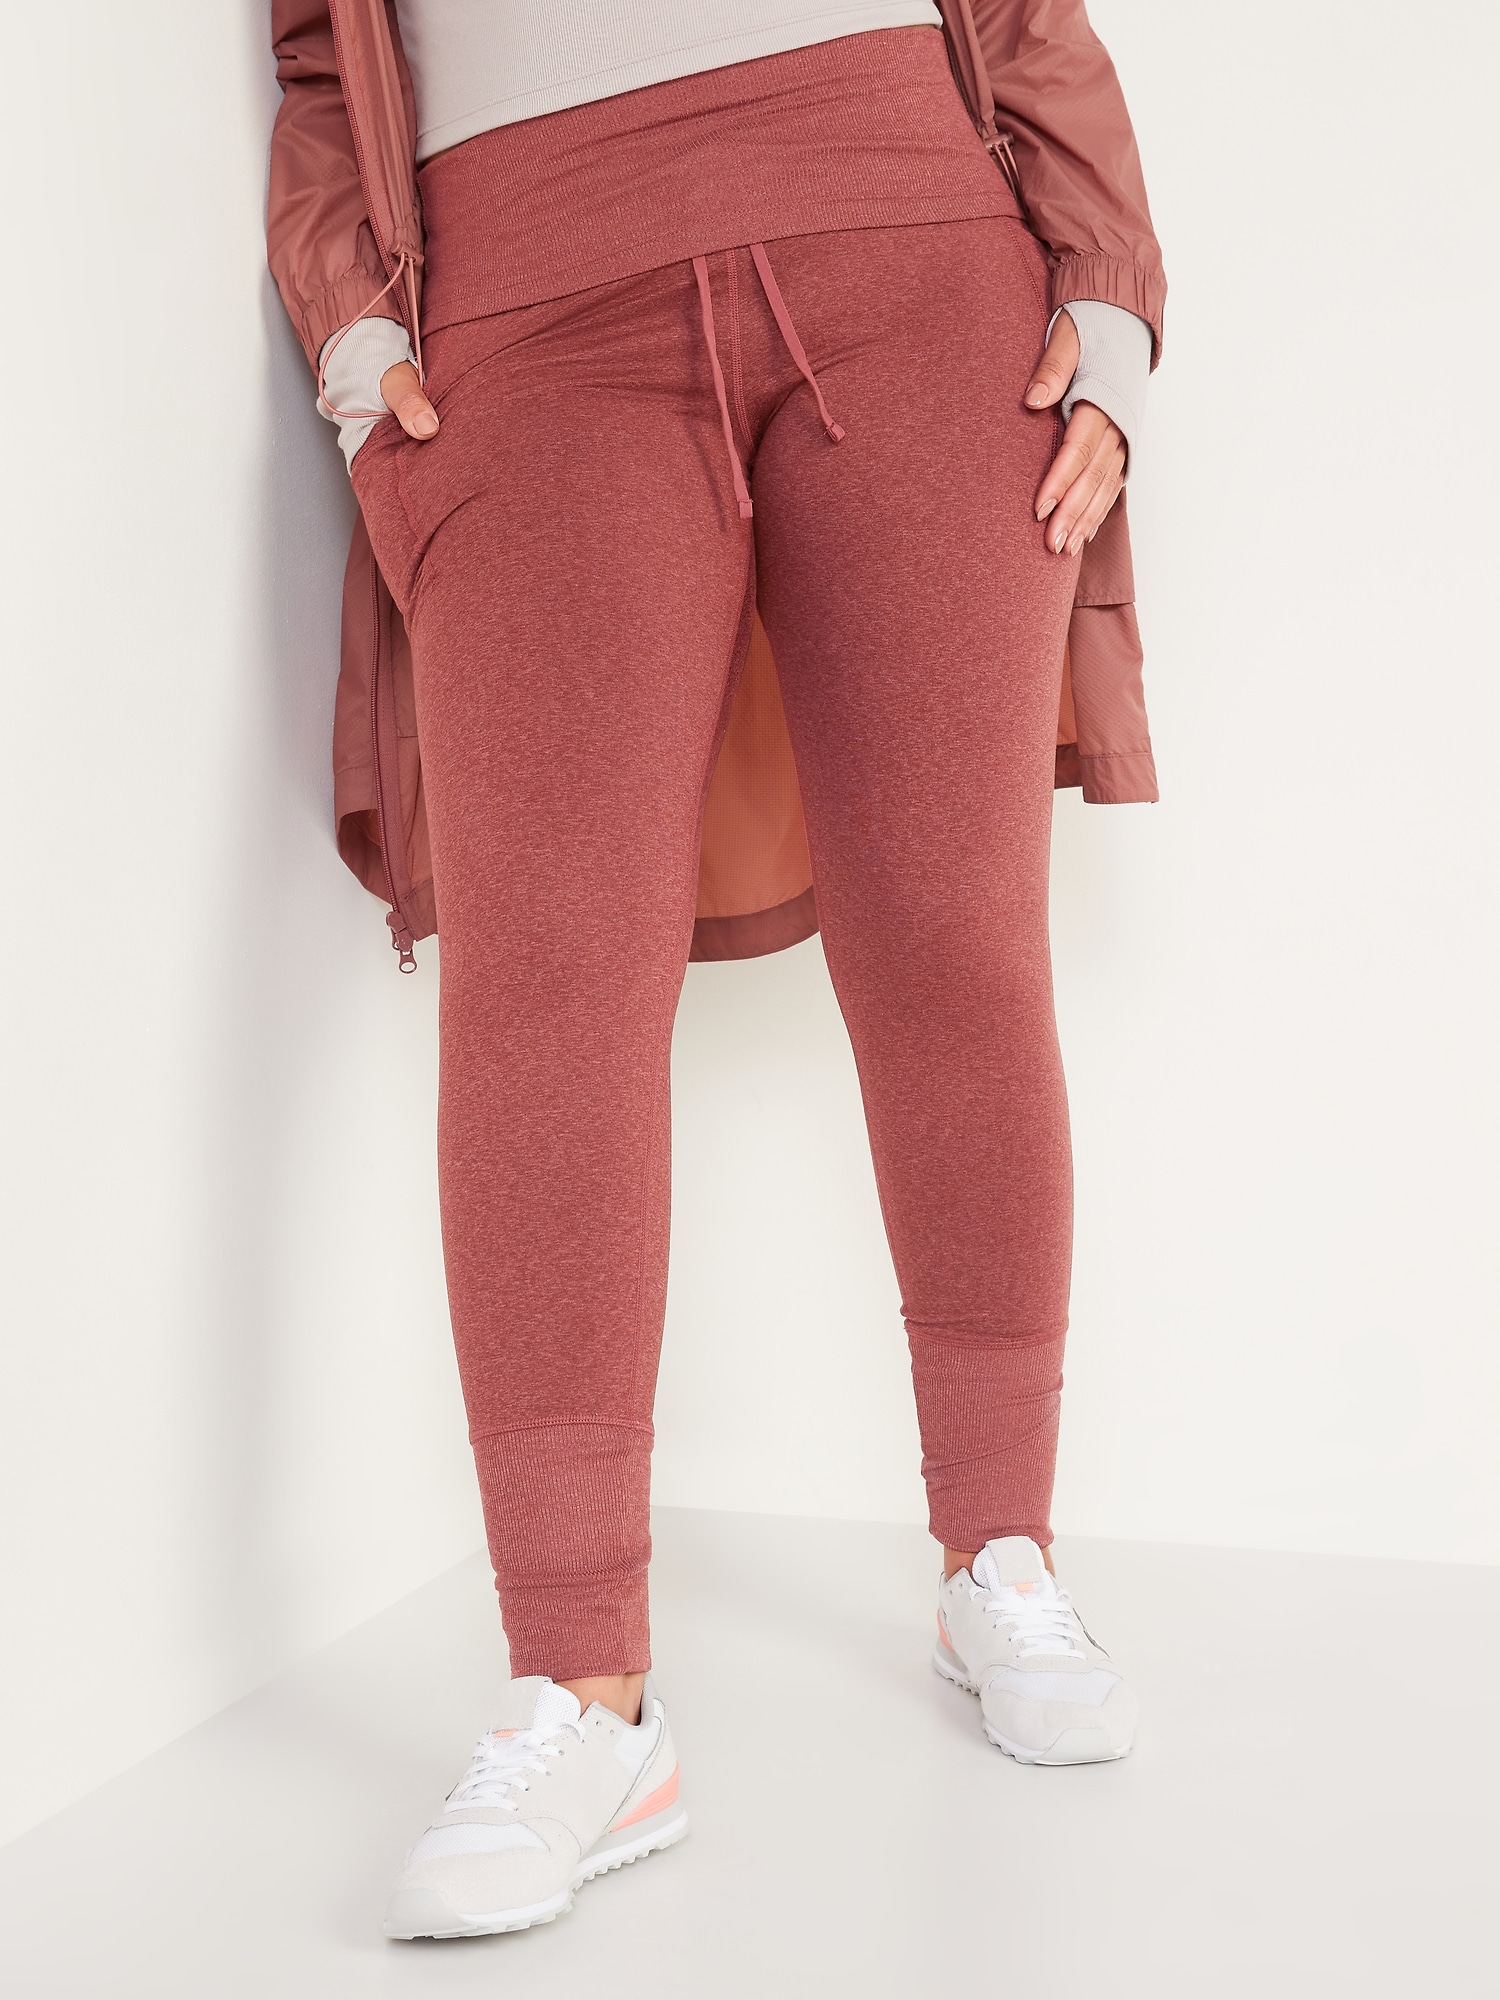 Old Navy, Pants & Jumpsuits, Old Navy Cozecore Leggings